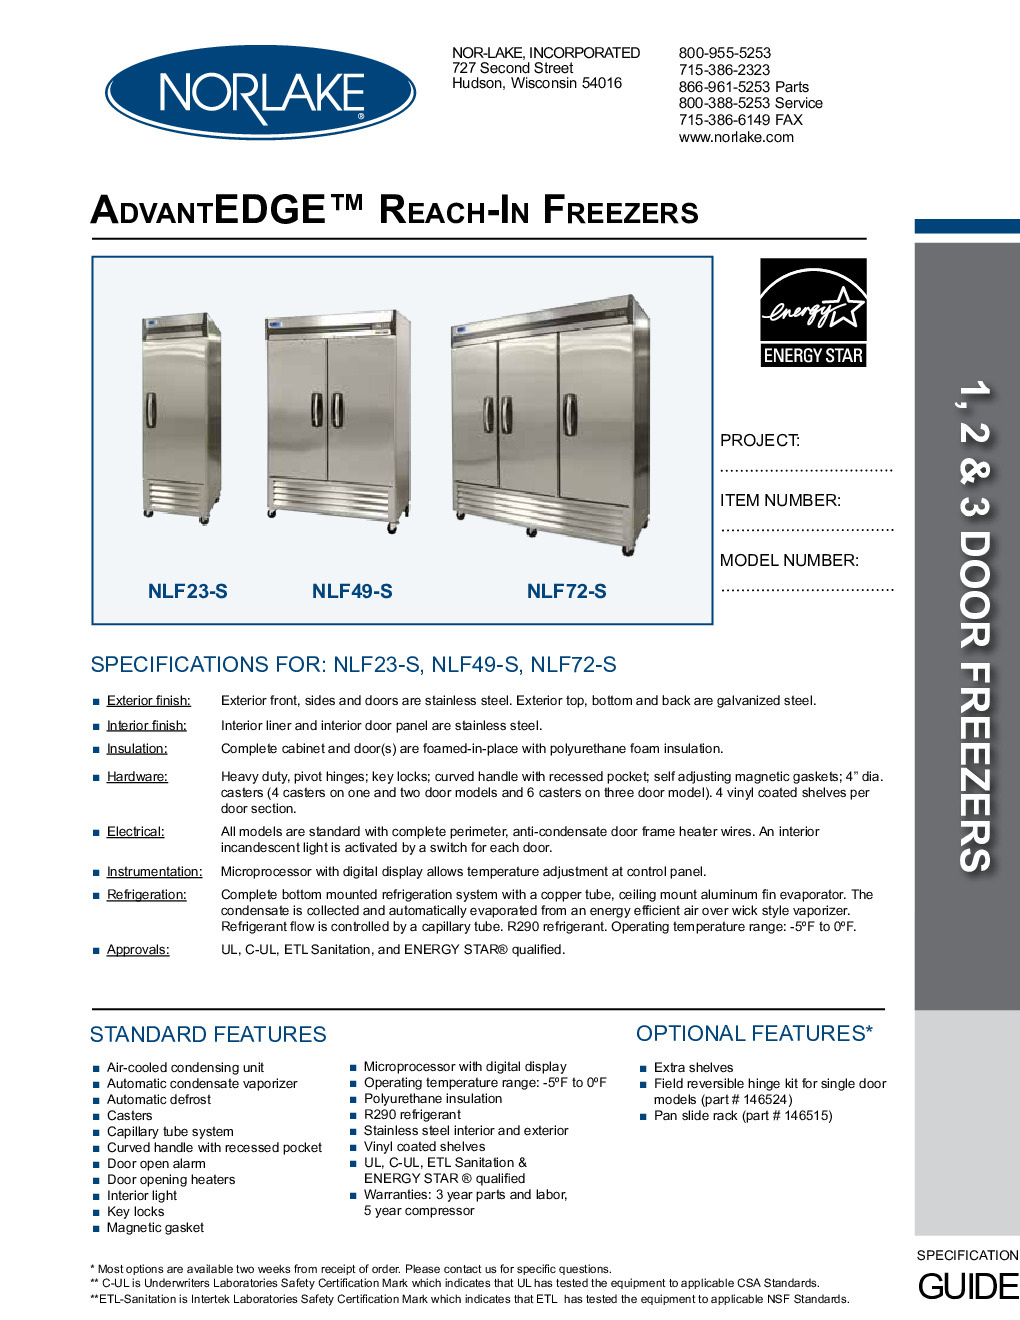 Nor-Lake NLF49-S Reach-In Freezer